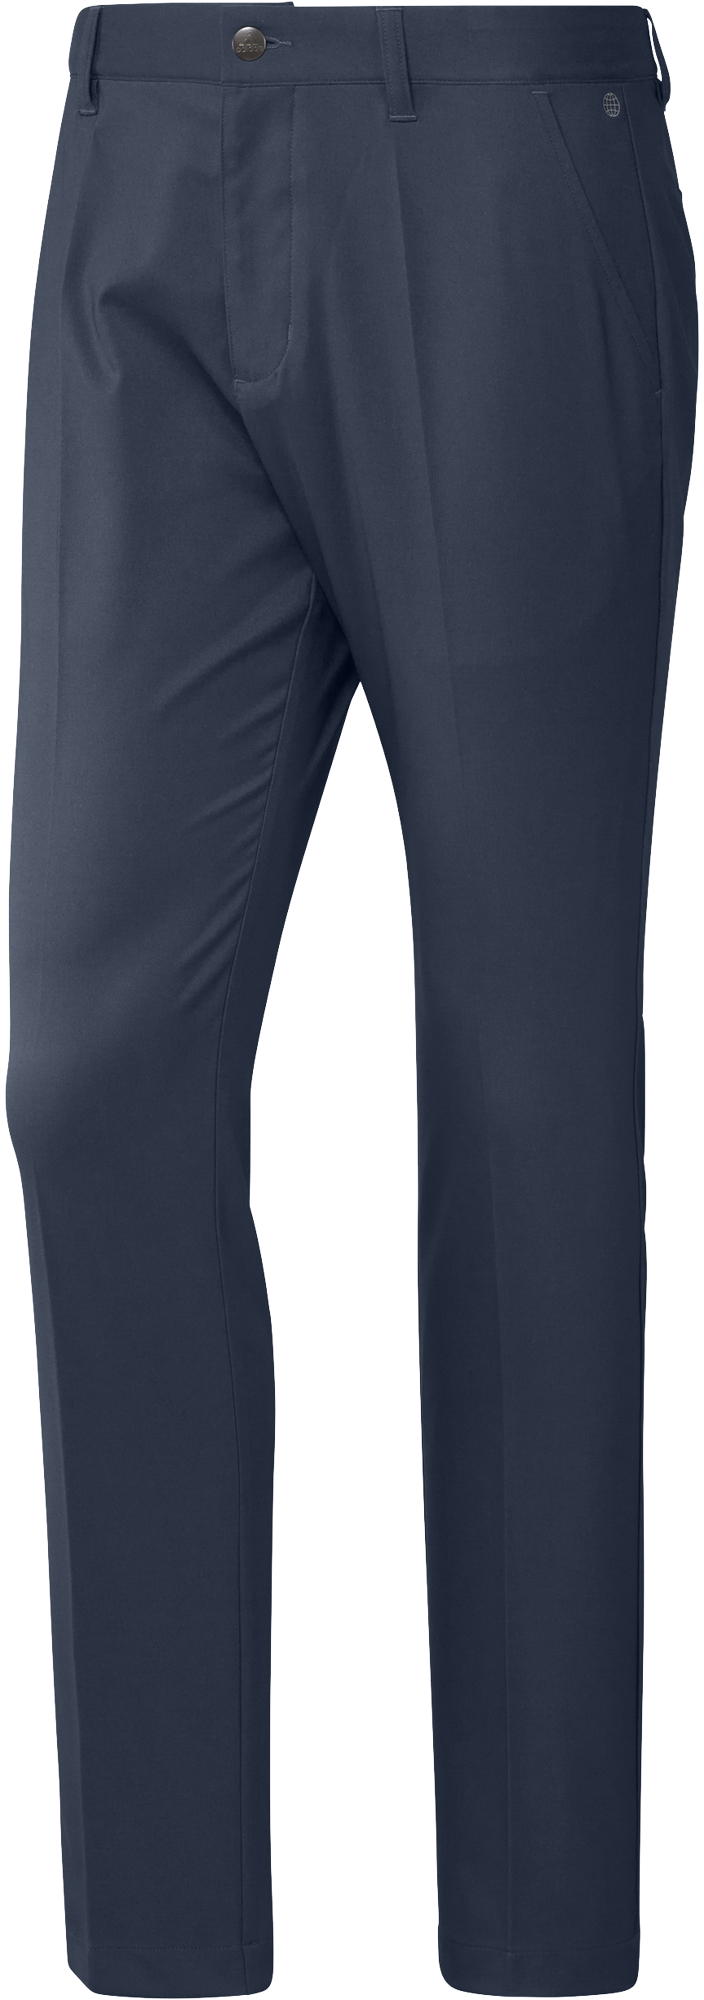 adidas Ultimate365 Primegreen Tapered Pant, navy